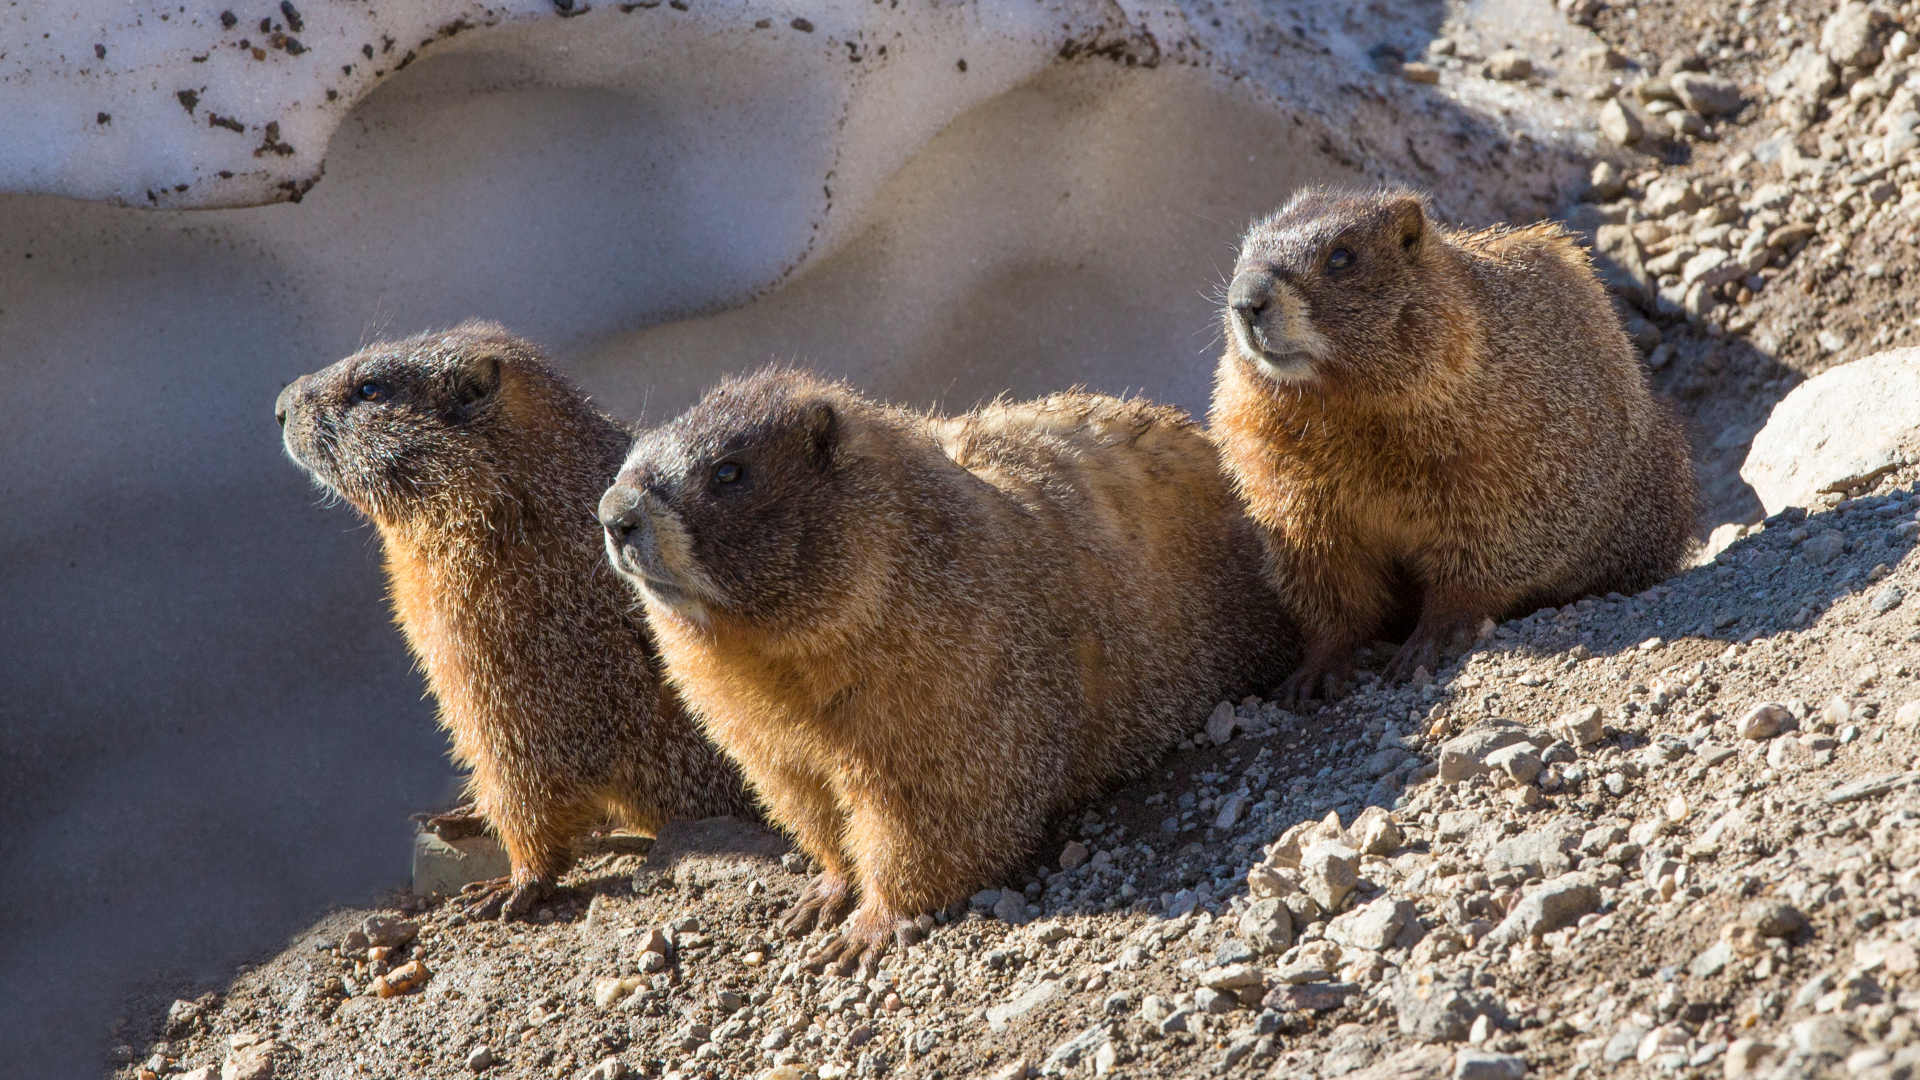 Yellow-bellied marmots in the Rocky Mountains of Colorado.